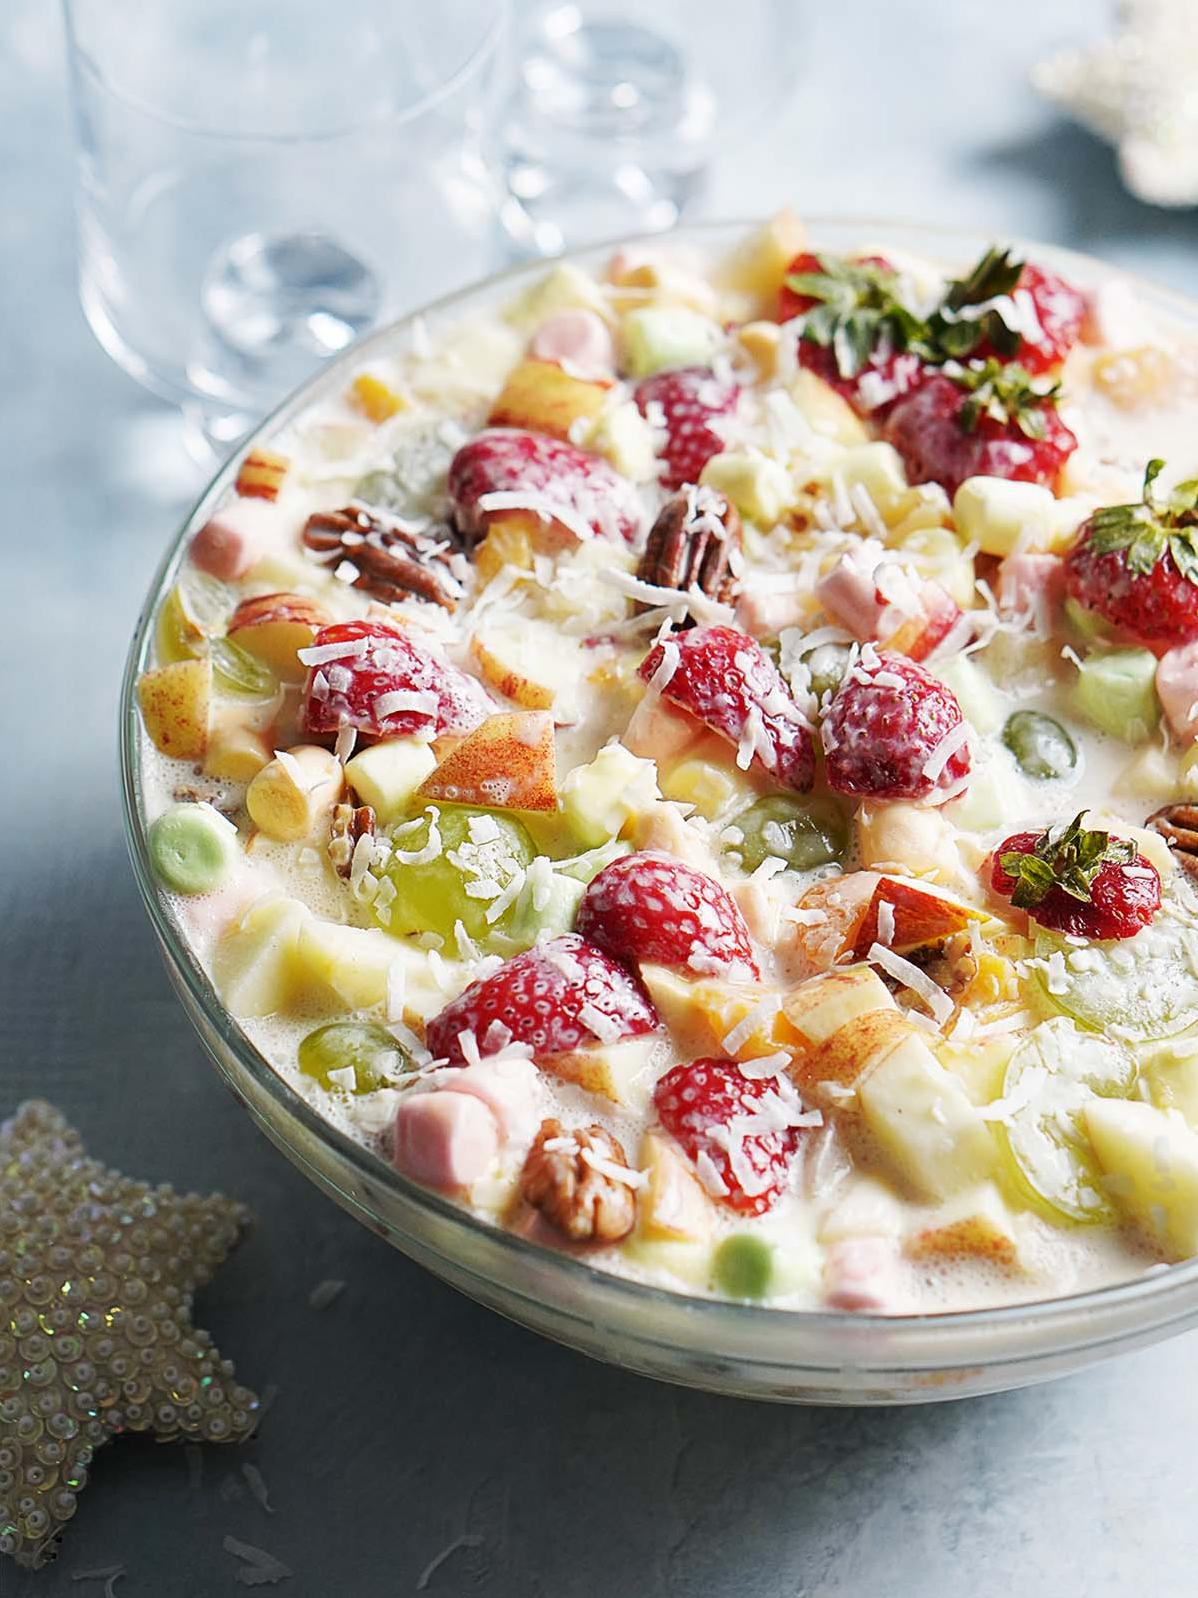  A deliciously sweet and refreshing fruit salad, perfect for any occasion!